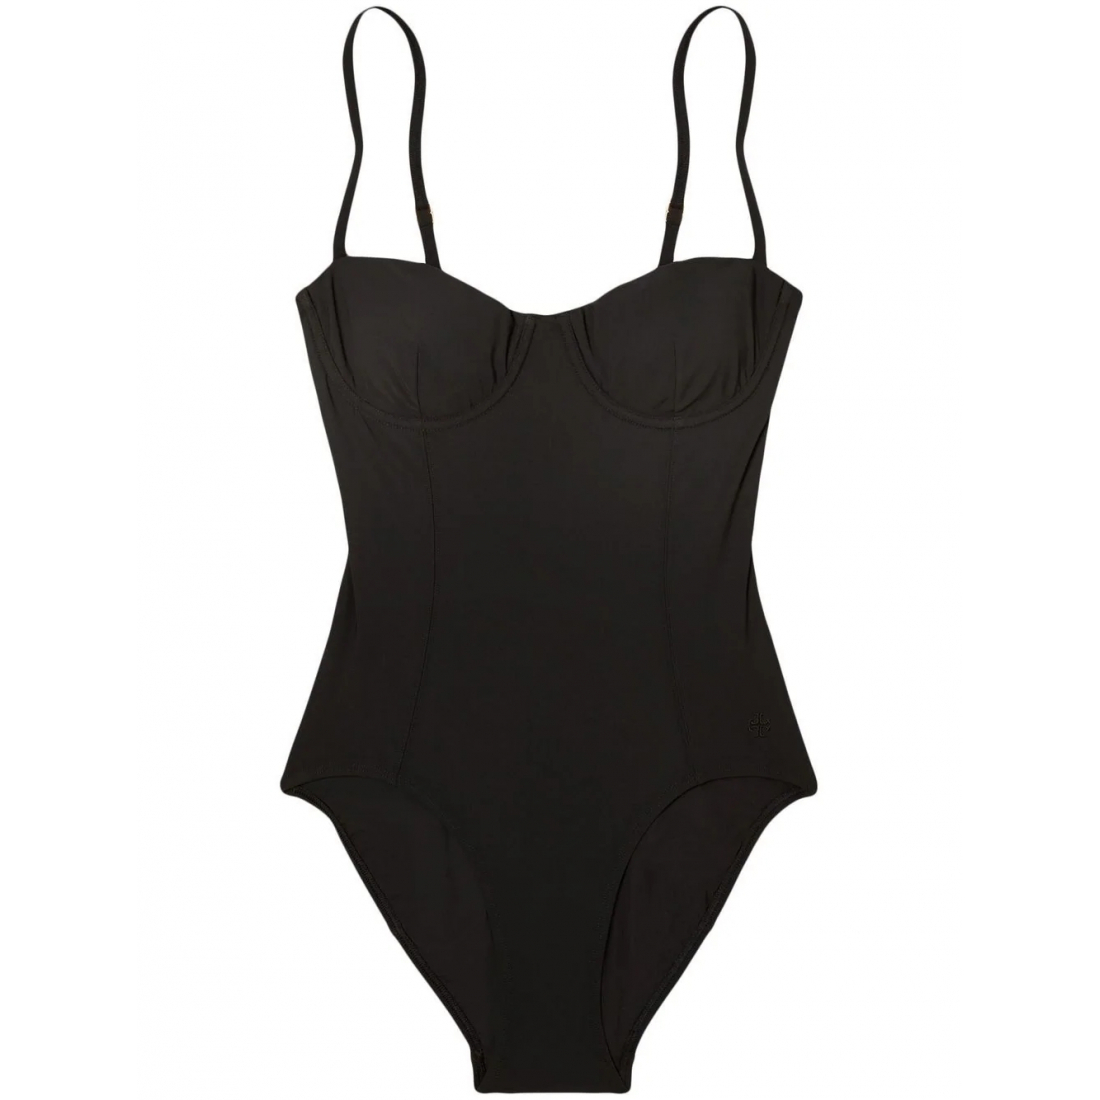 Women's 'Underwire Cup' Swimsuit